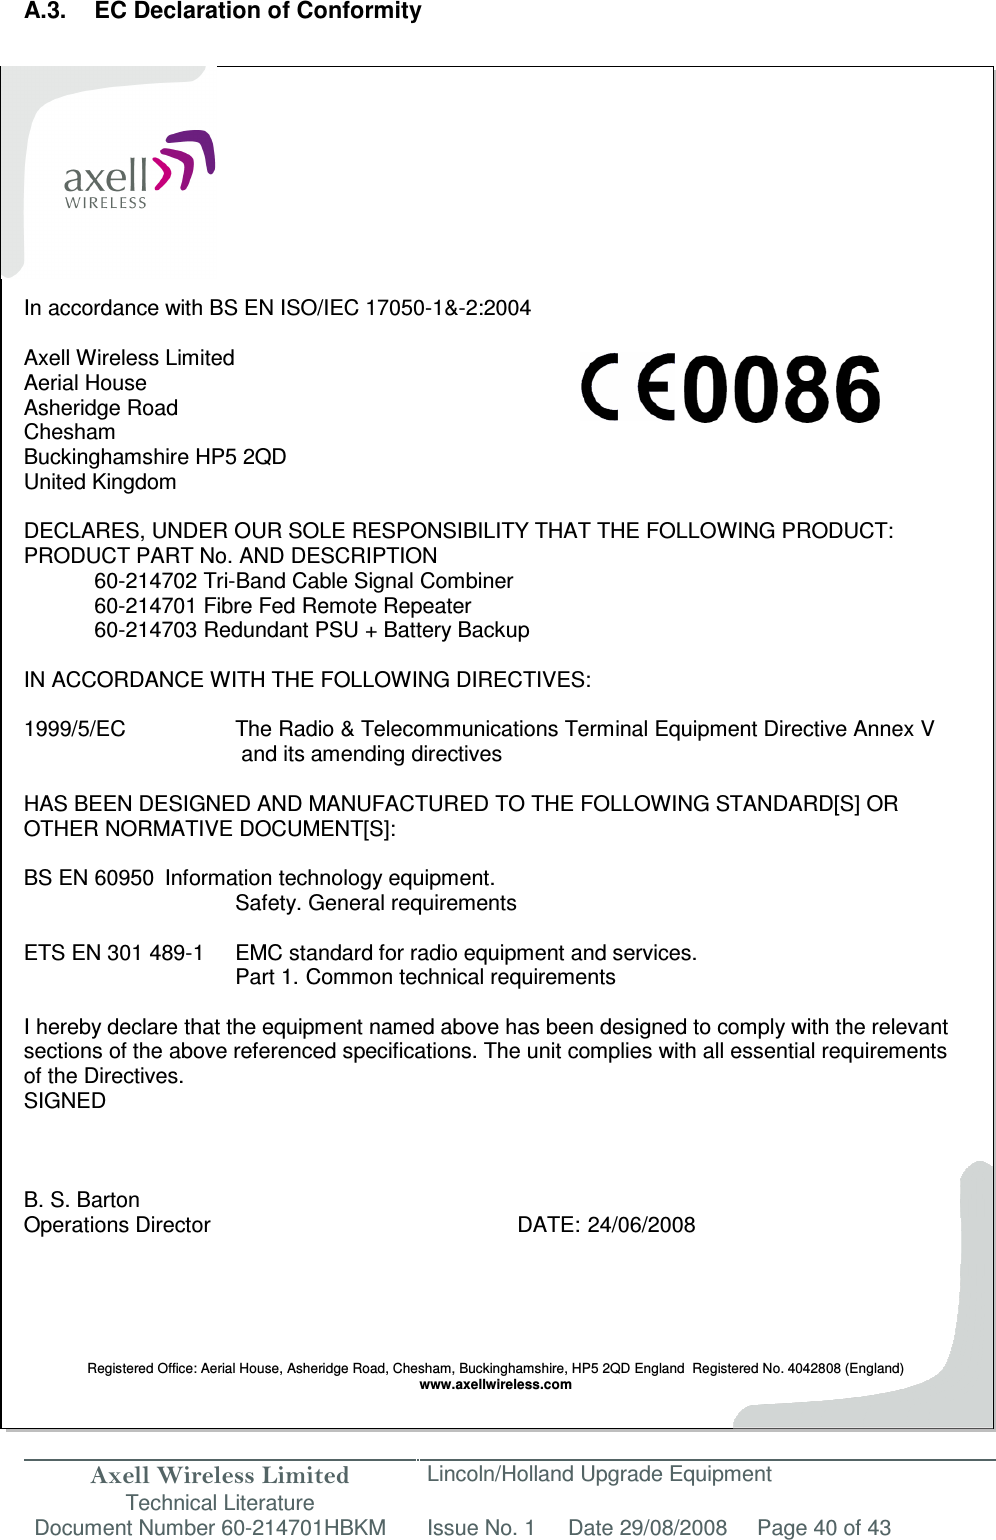 Axell Wireless Limited Technical Literature Lincoln/Holland Upgrade Equipment Document Number 60-214701HBKM Issue No. 1 Date 29/08/2008 Page 40 of 43   A.3.  EC Declaration of Conformity            In accordance with BS EN ISO/IEC 17050-1&amp;-2:2004  Axell Wireless Limited Aerial House Asheridge Road Chesham Buckinghamshire HP5 2QD United Kingdom  DECLARES, UNDER OUR SOLE RESPONSIBILITY THAT THE FOLLOWING PRODUCT: PRODUCT PART No. AND DESCRIPTION 60-214702 Tri-Band Cable Signal Combiner 60-214701 Fibre Fed Remote Repeater 60-214703 Redundant PSU + Battery Backup  IN ACCORDANCE WITH THE FOLLOWING DIRECTIVES:  1999/5/EC    The Radio &amp; Telecommunications Terminal Equipment Directive Annex V        and its amending directives  HAS BEEN DESIGNED AND MANUFACTURED TO THE FOLLOWING STANDARD[S] OR OTHER NORMATIVE DOCUMENT[S]:  BS EN 60950  Information technology equipment.        Safety. General requirements   ETS EN 301 489-1  EMC standard for radio equipment and services.        Part 1.  Common technical requirements  I hereby declare that the equipment named above has been designed to comply with the relevant sections of the above referenced specifications. The unit complies with all essential requirements of the Directives. SIGNED    B. S. Barton Operations Director          DATE: 24/06/2008      Registered Office: Aerial House, Asheridge Road, Chesham, Buckinghamshire, HP5 2QD England  Registered No. 4042808 (England) www.axellwireless.com    